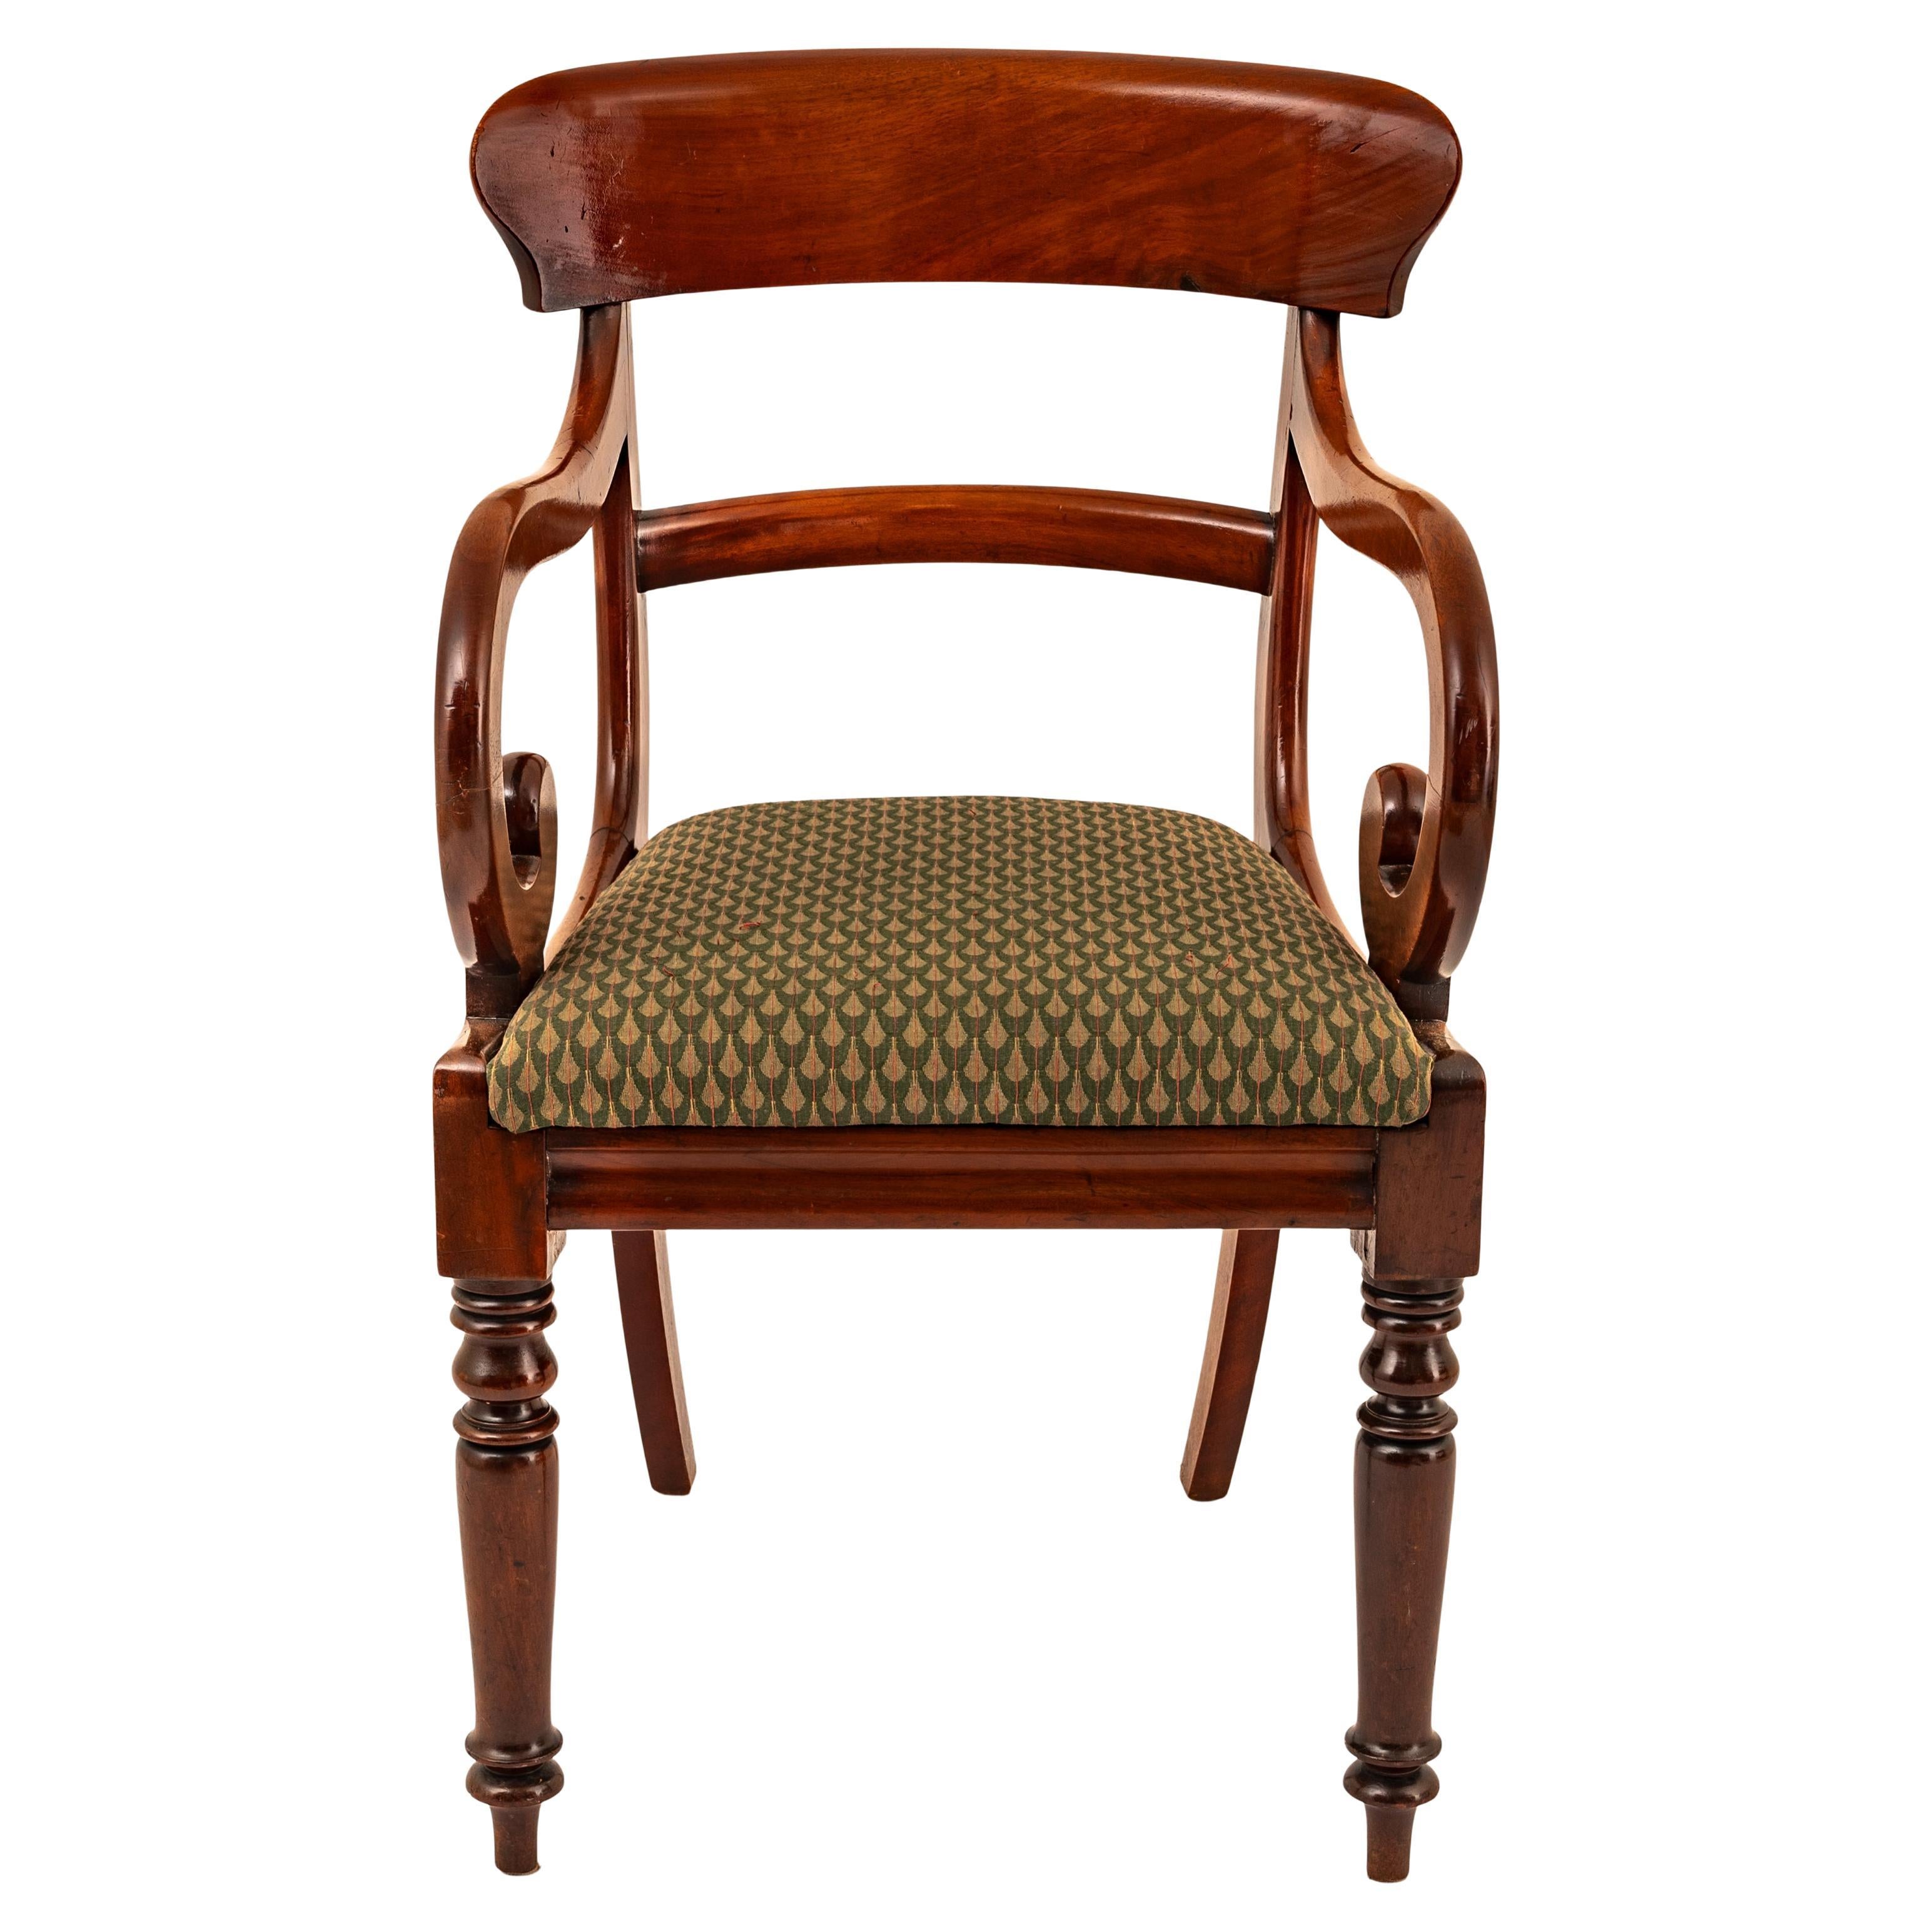 Antique 19th Century Georgian Regency Mahogany Armchair Library Desk Chair 1820 In Good Condition For Sale In Portland, OR